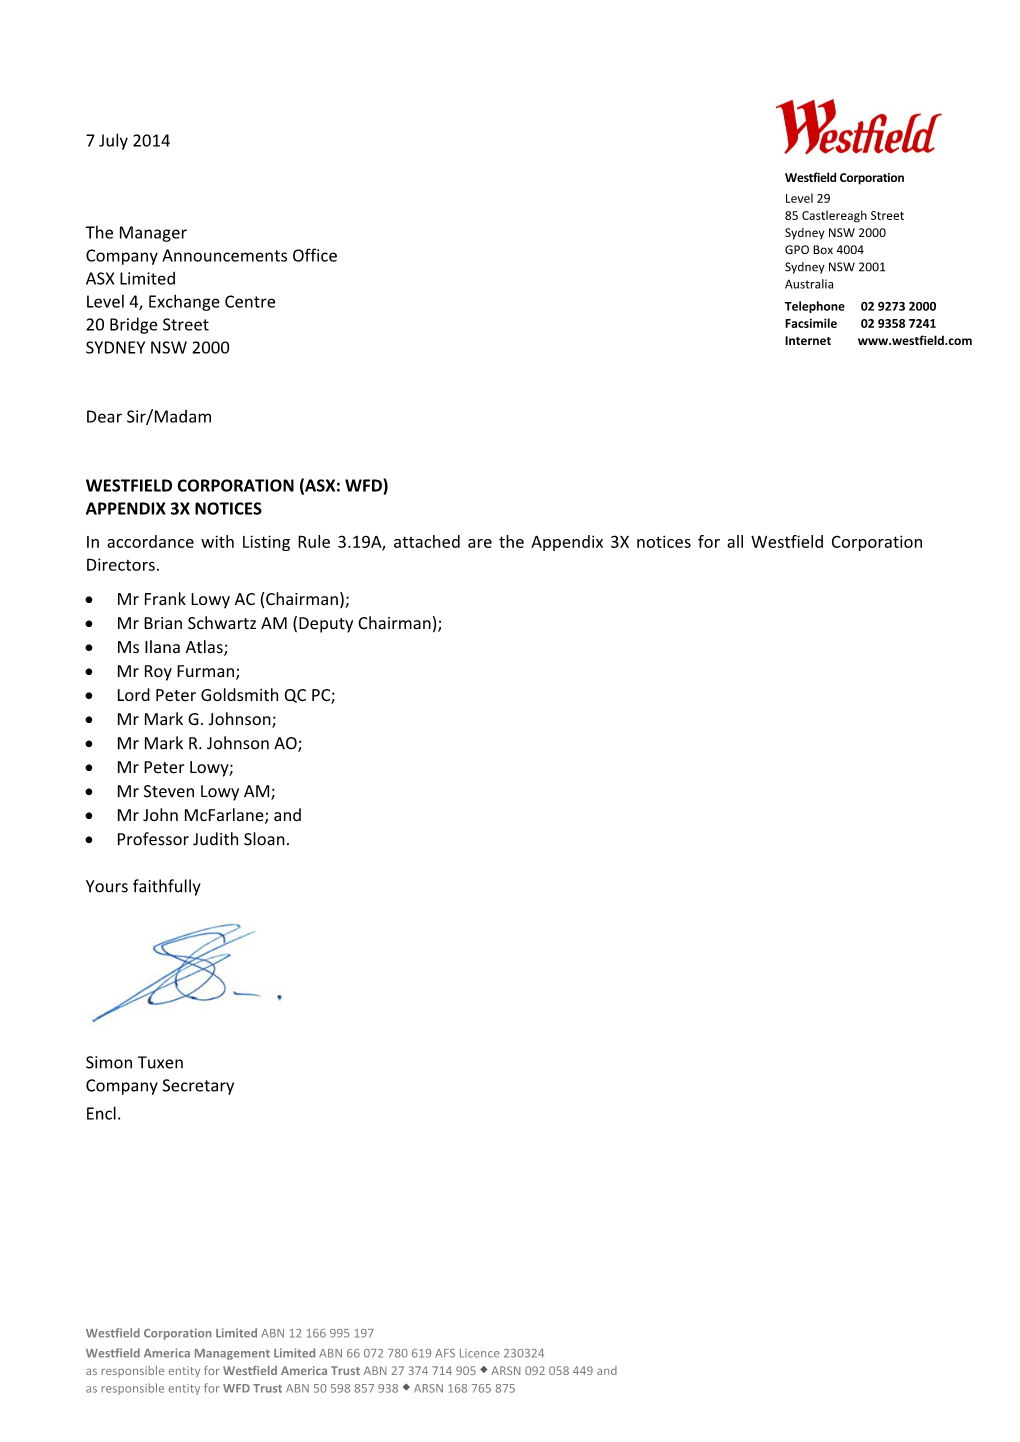 7 July 2014 the Manager Company Announcements Office ASX Limited